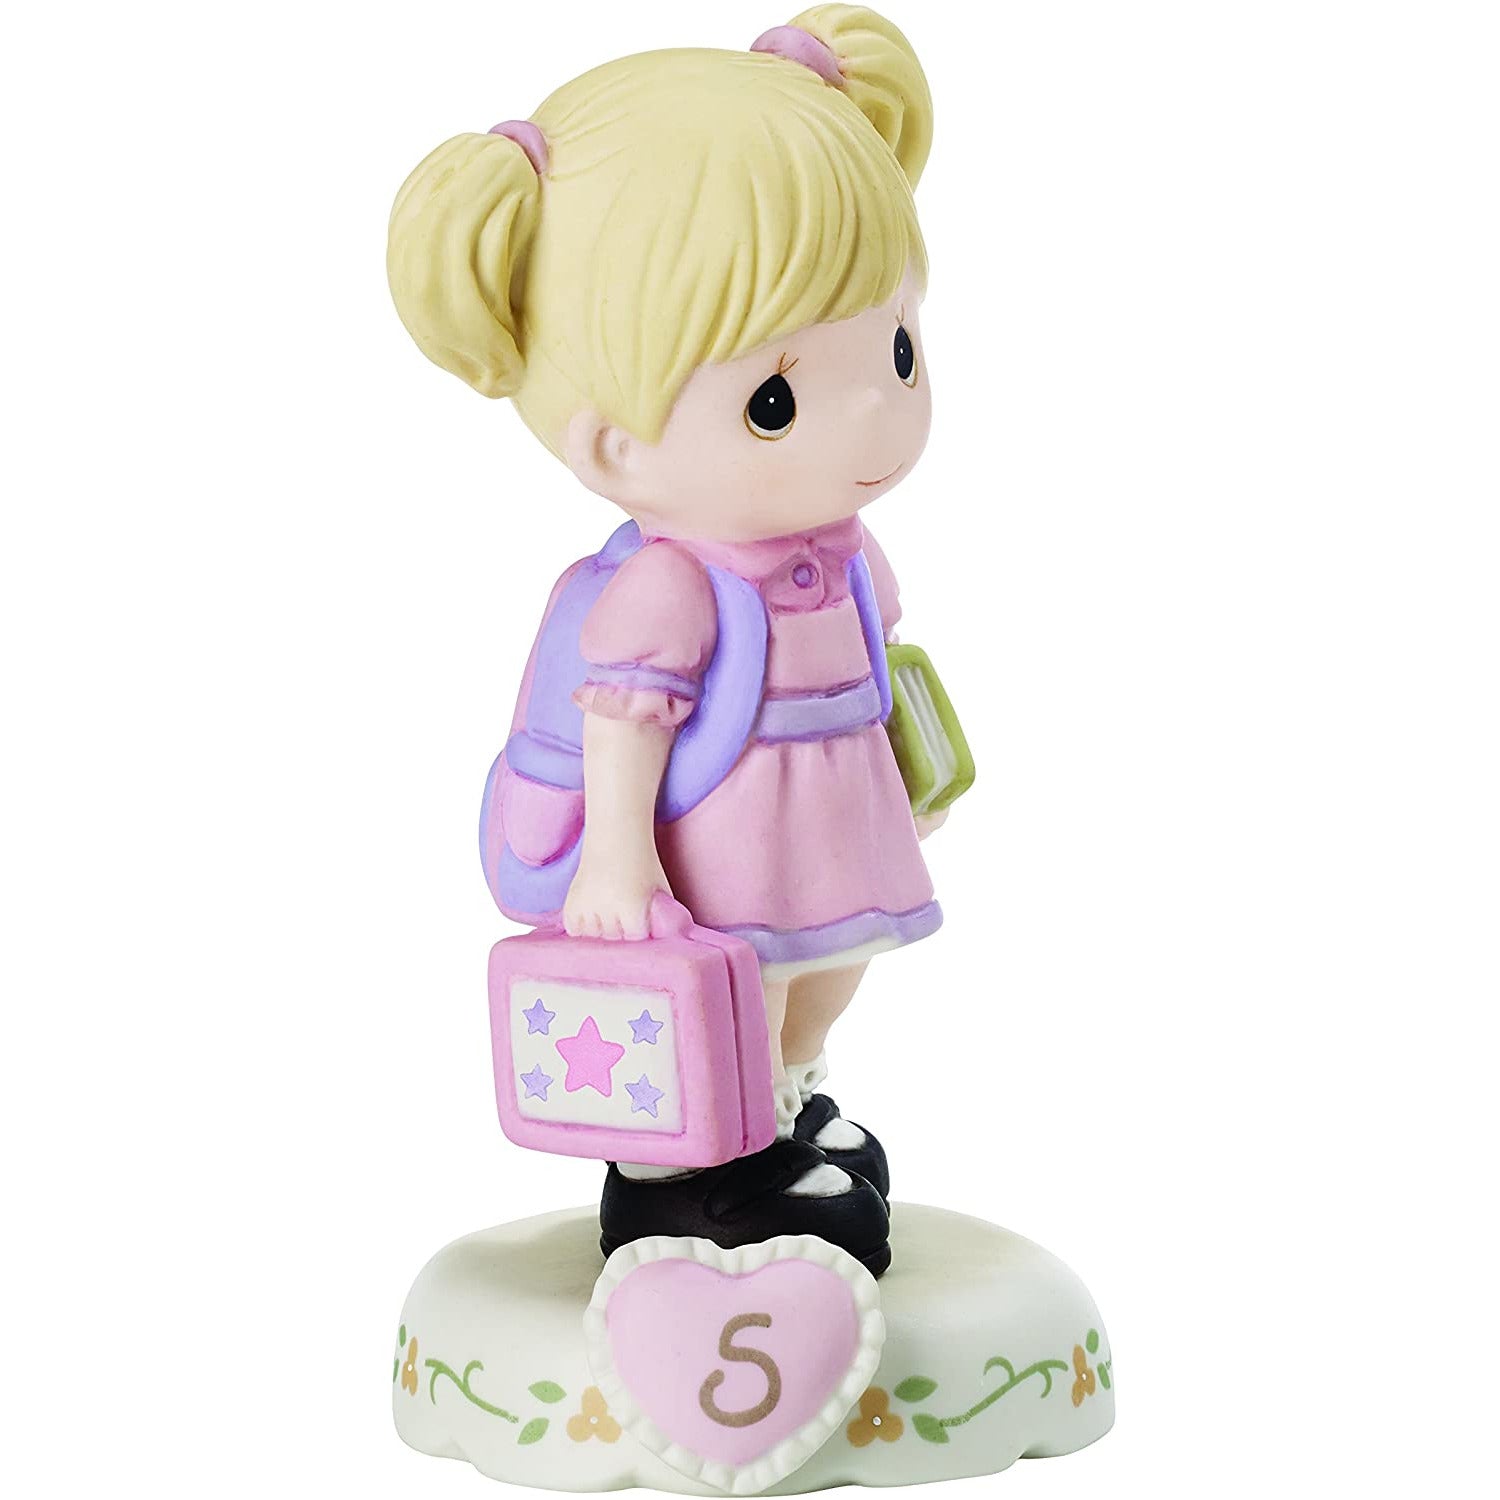 Precious Moments 152011 "Growing In Grace, Age 5" Girl Bisque Porcelain Figurine Birthday Gifts, Blonde